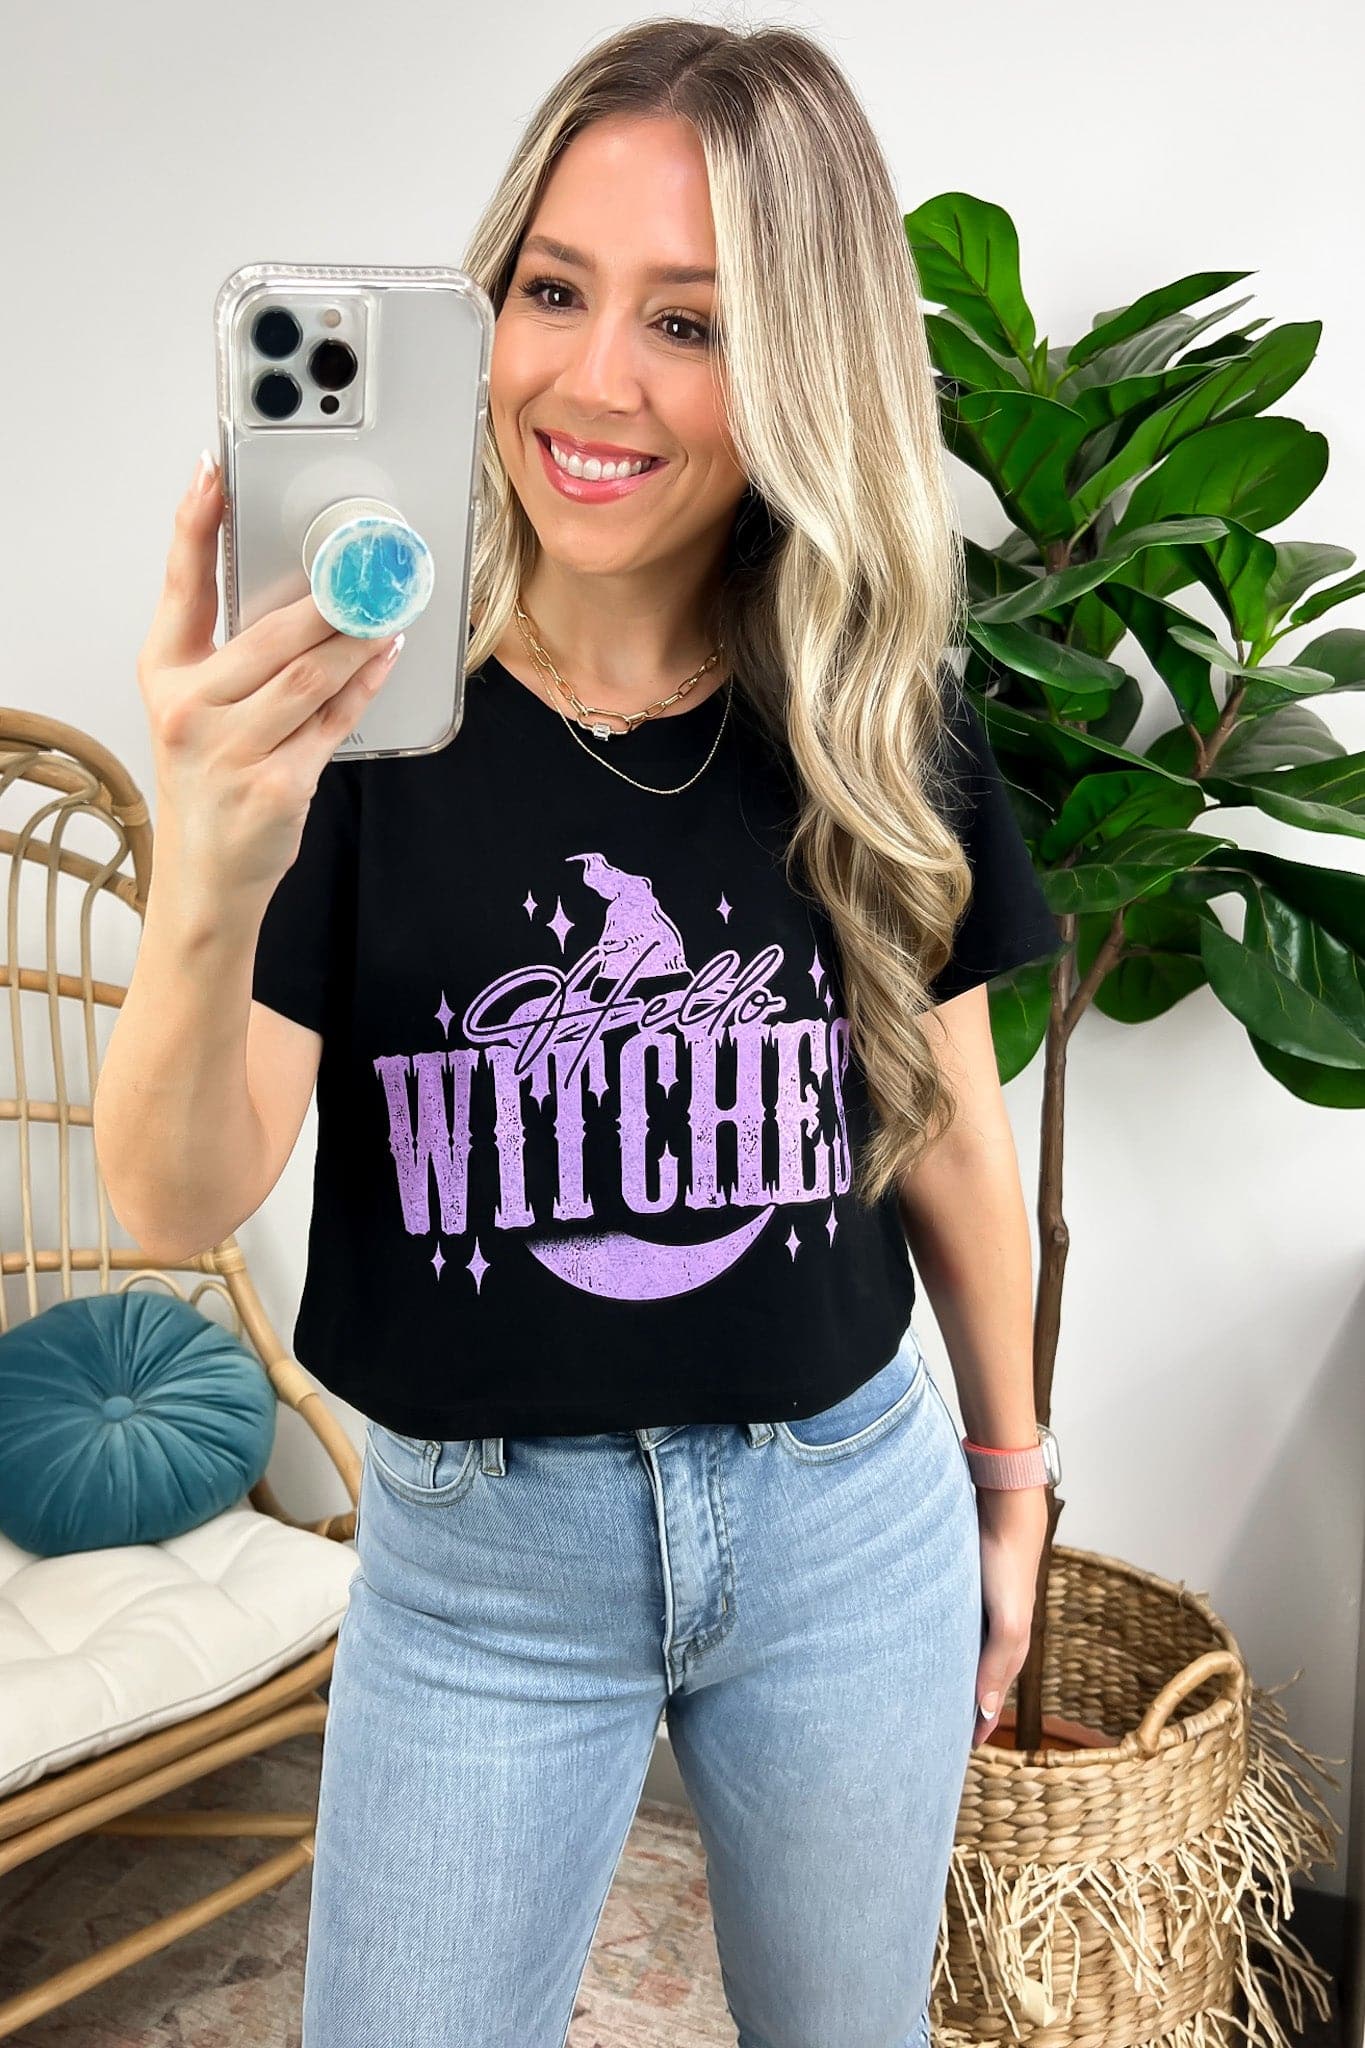  Hello Witches Graphic Cropped Tee - FINAL SALE - Madison and Mallory